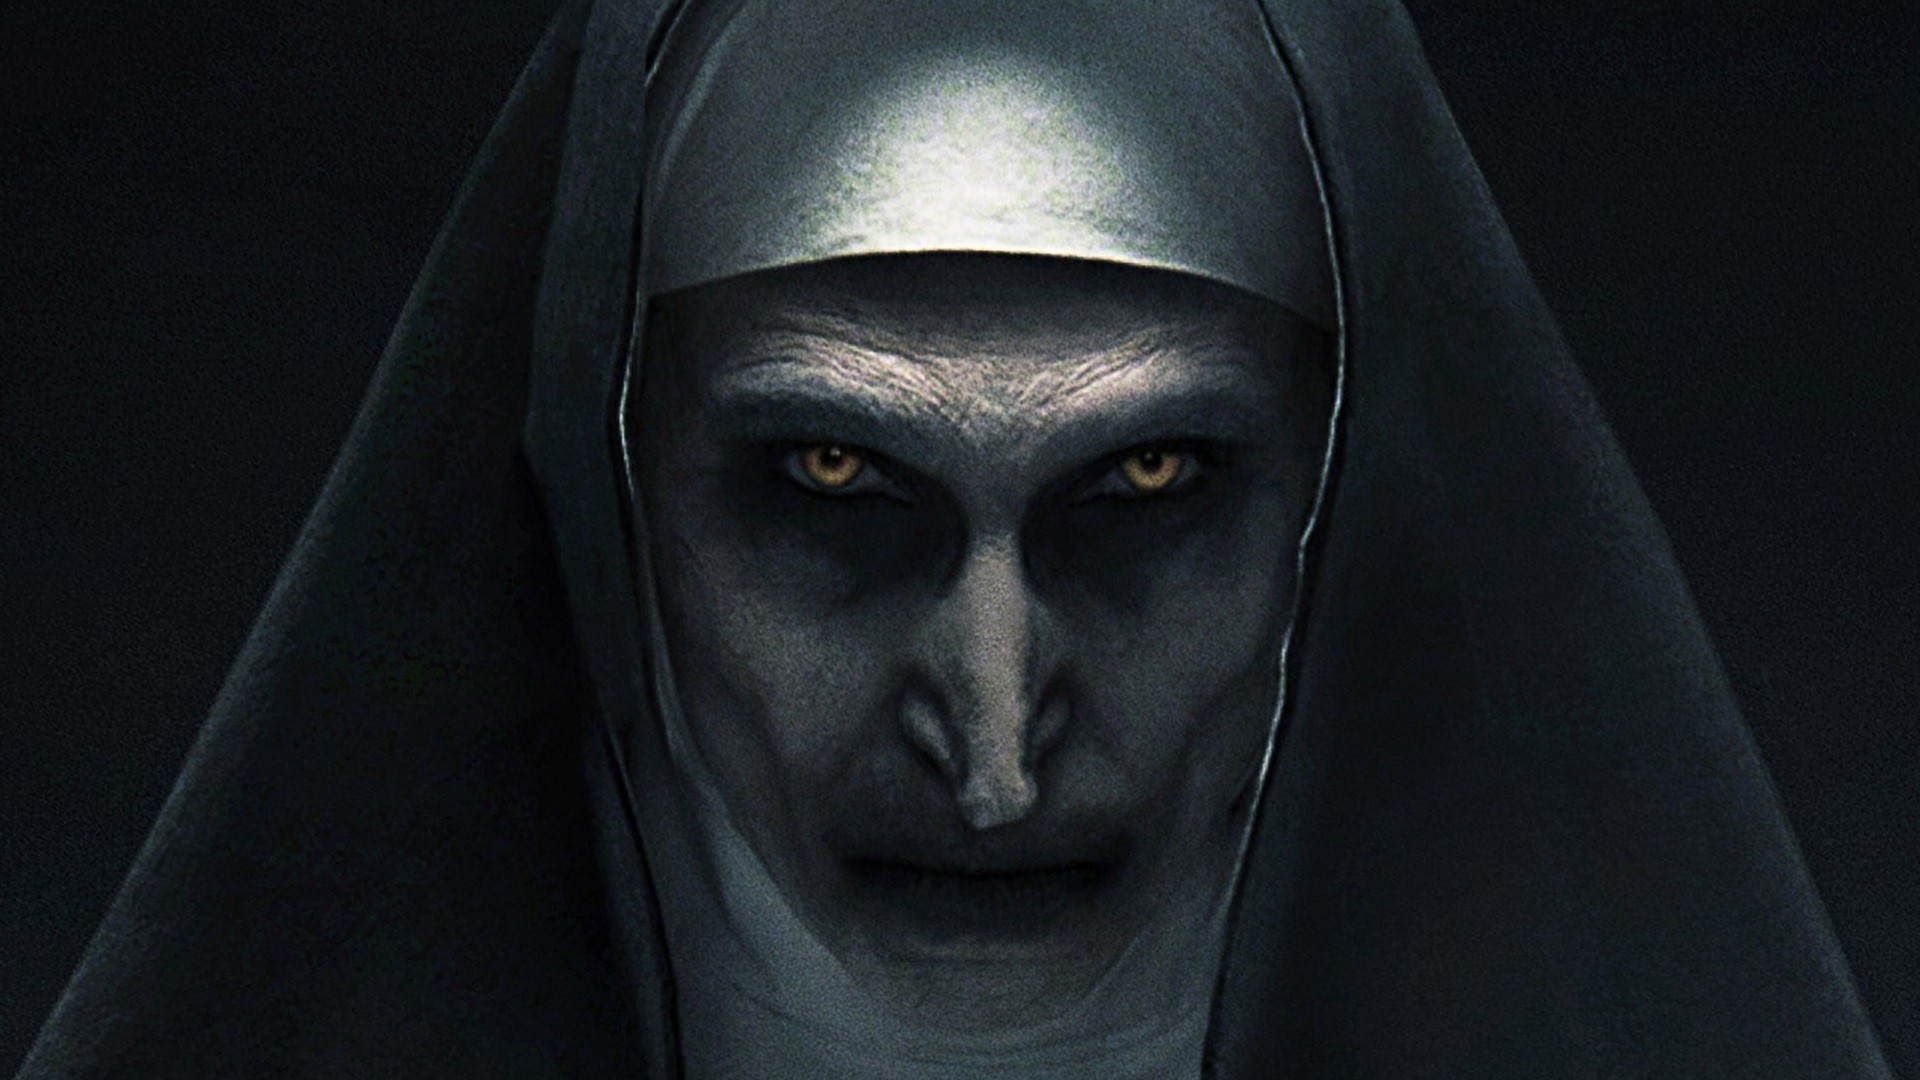 The Nun Movie Desktop Wallpaper with resolution 1920X1080 pixel. You can use this wallpaper as background for your desktop Computer Screensavers, Android or iPhone smartphones